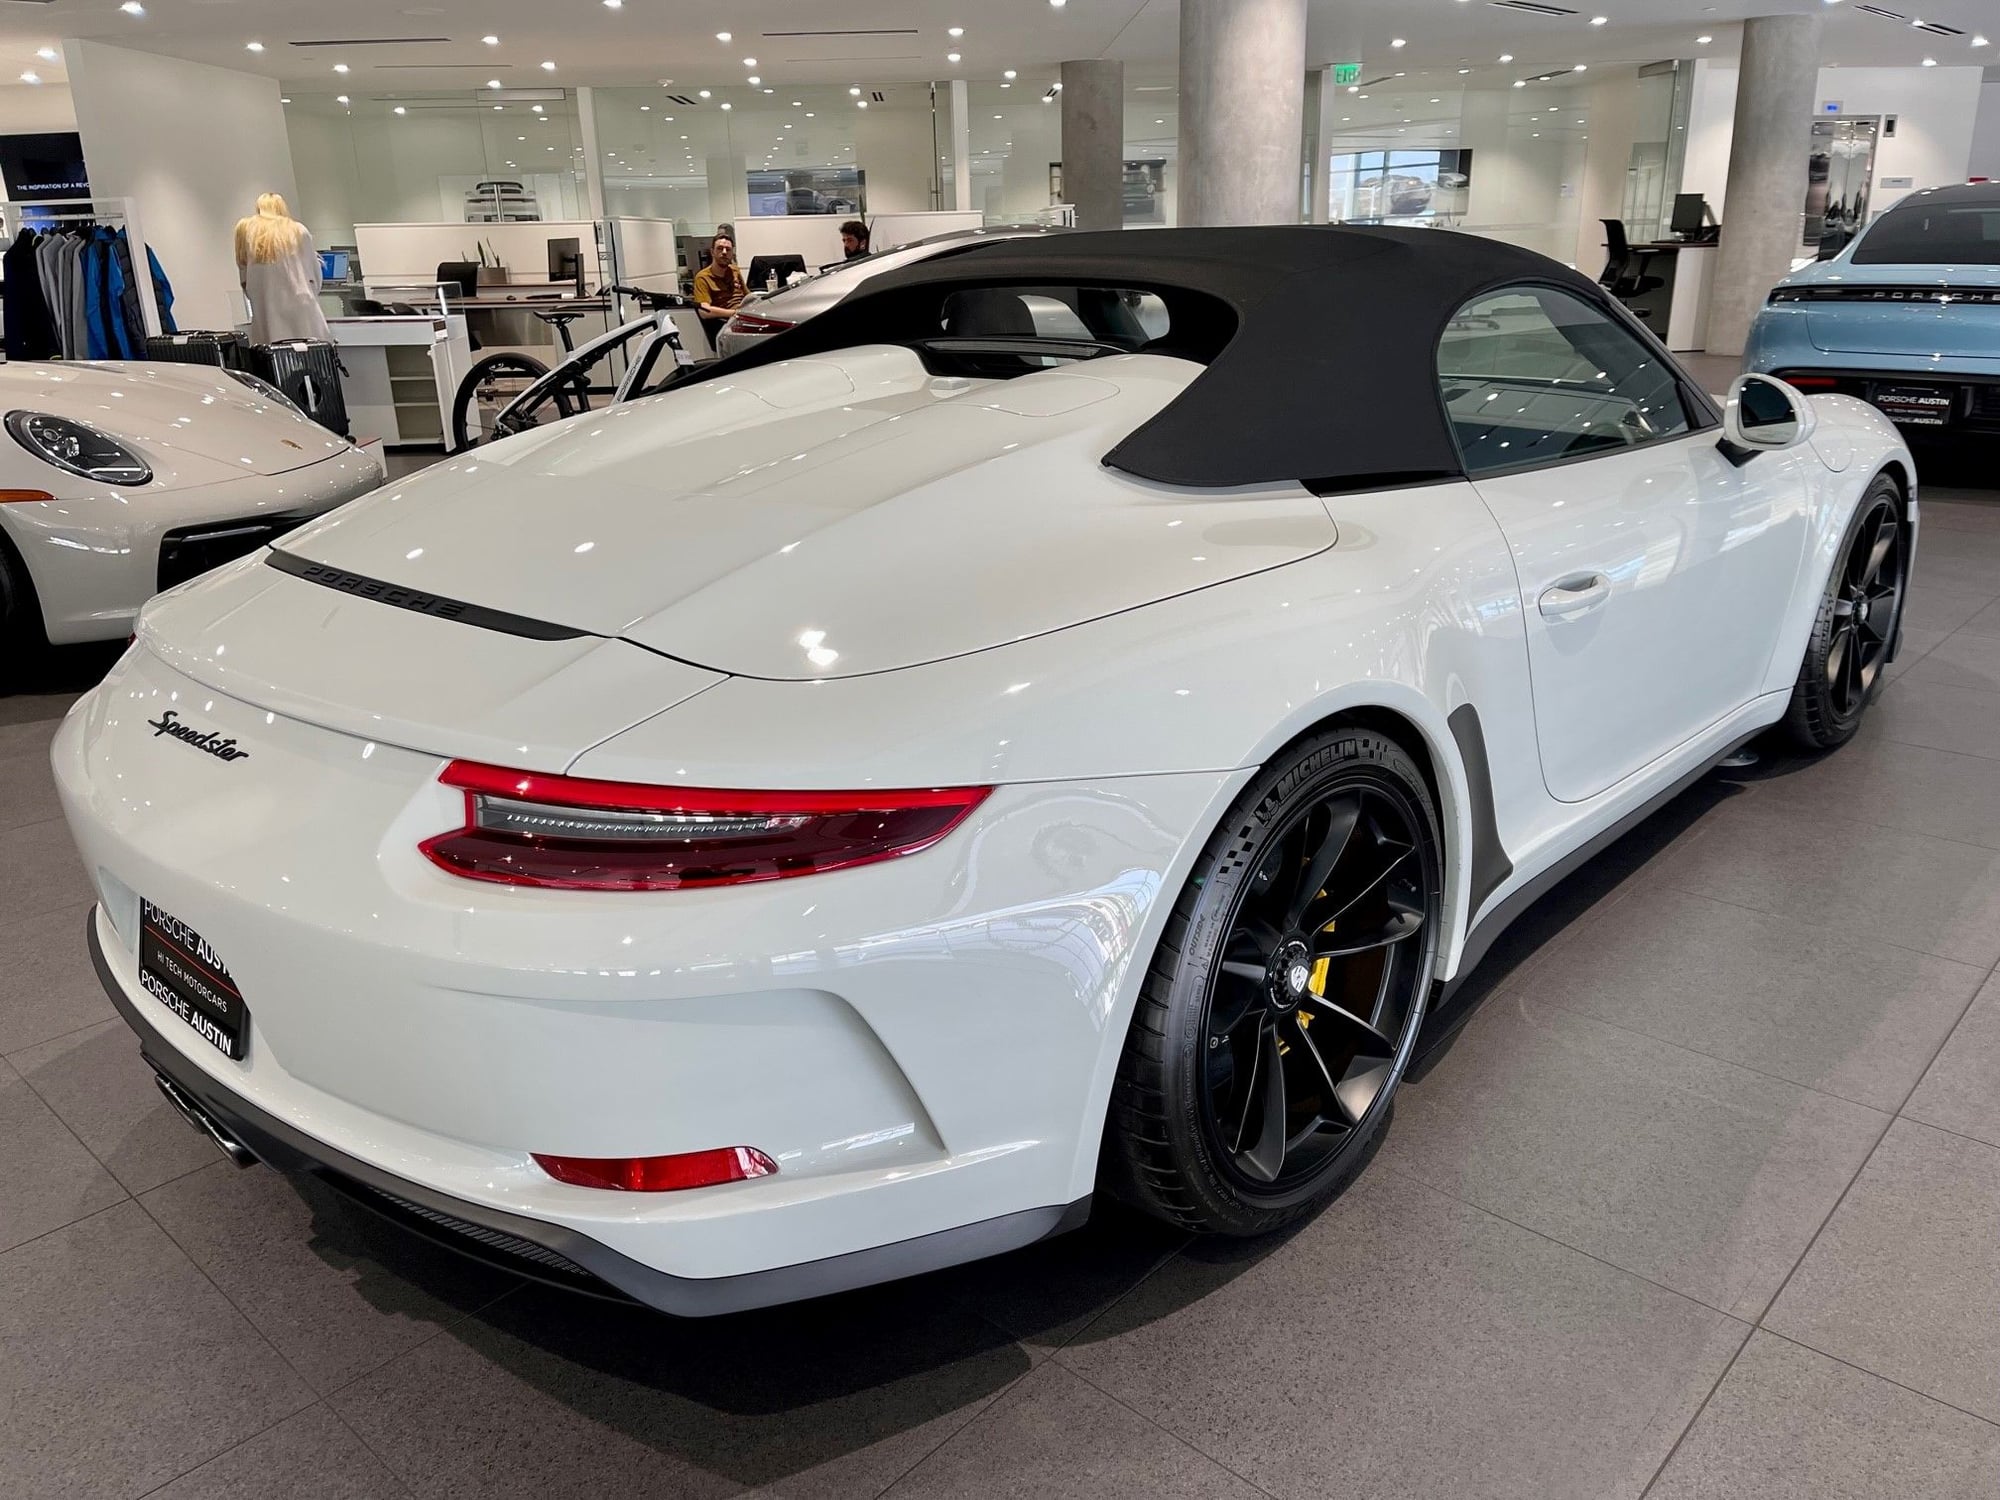 2019 Porsche 911 - 2019 911 Speedster PTS Dolphin Grey CPO Delivery Miles - Used - VIN WP0CF2A97KS172442 - 32 Miles - 6 cyl - 2WD - Manual - Convertible - Gray - Austin, TX 78759, United States